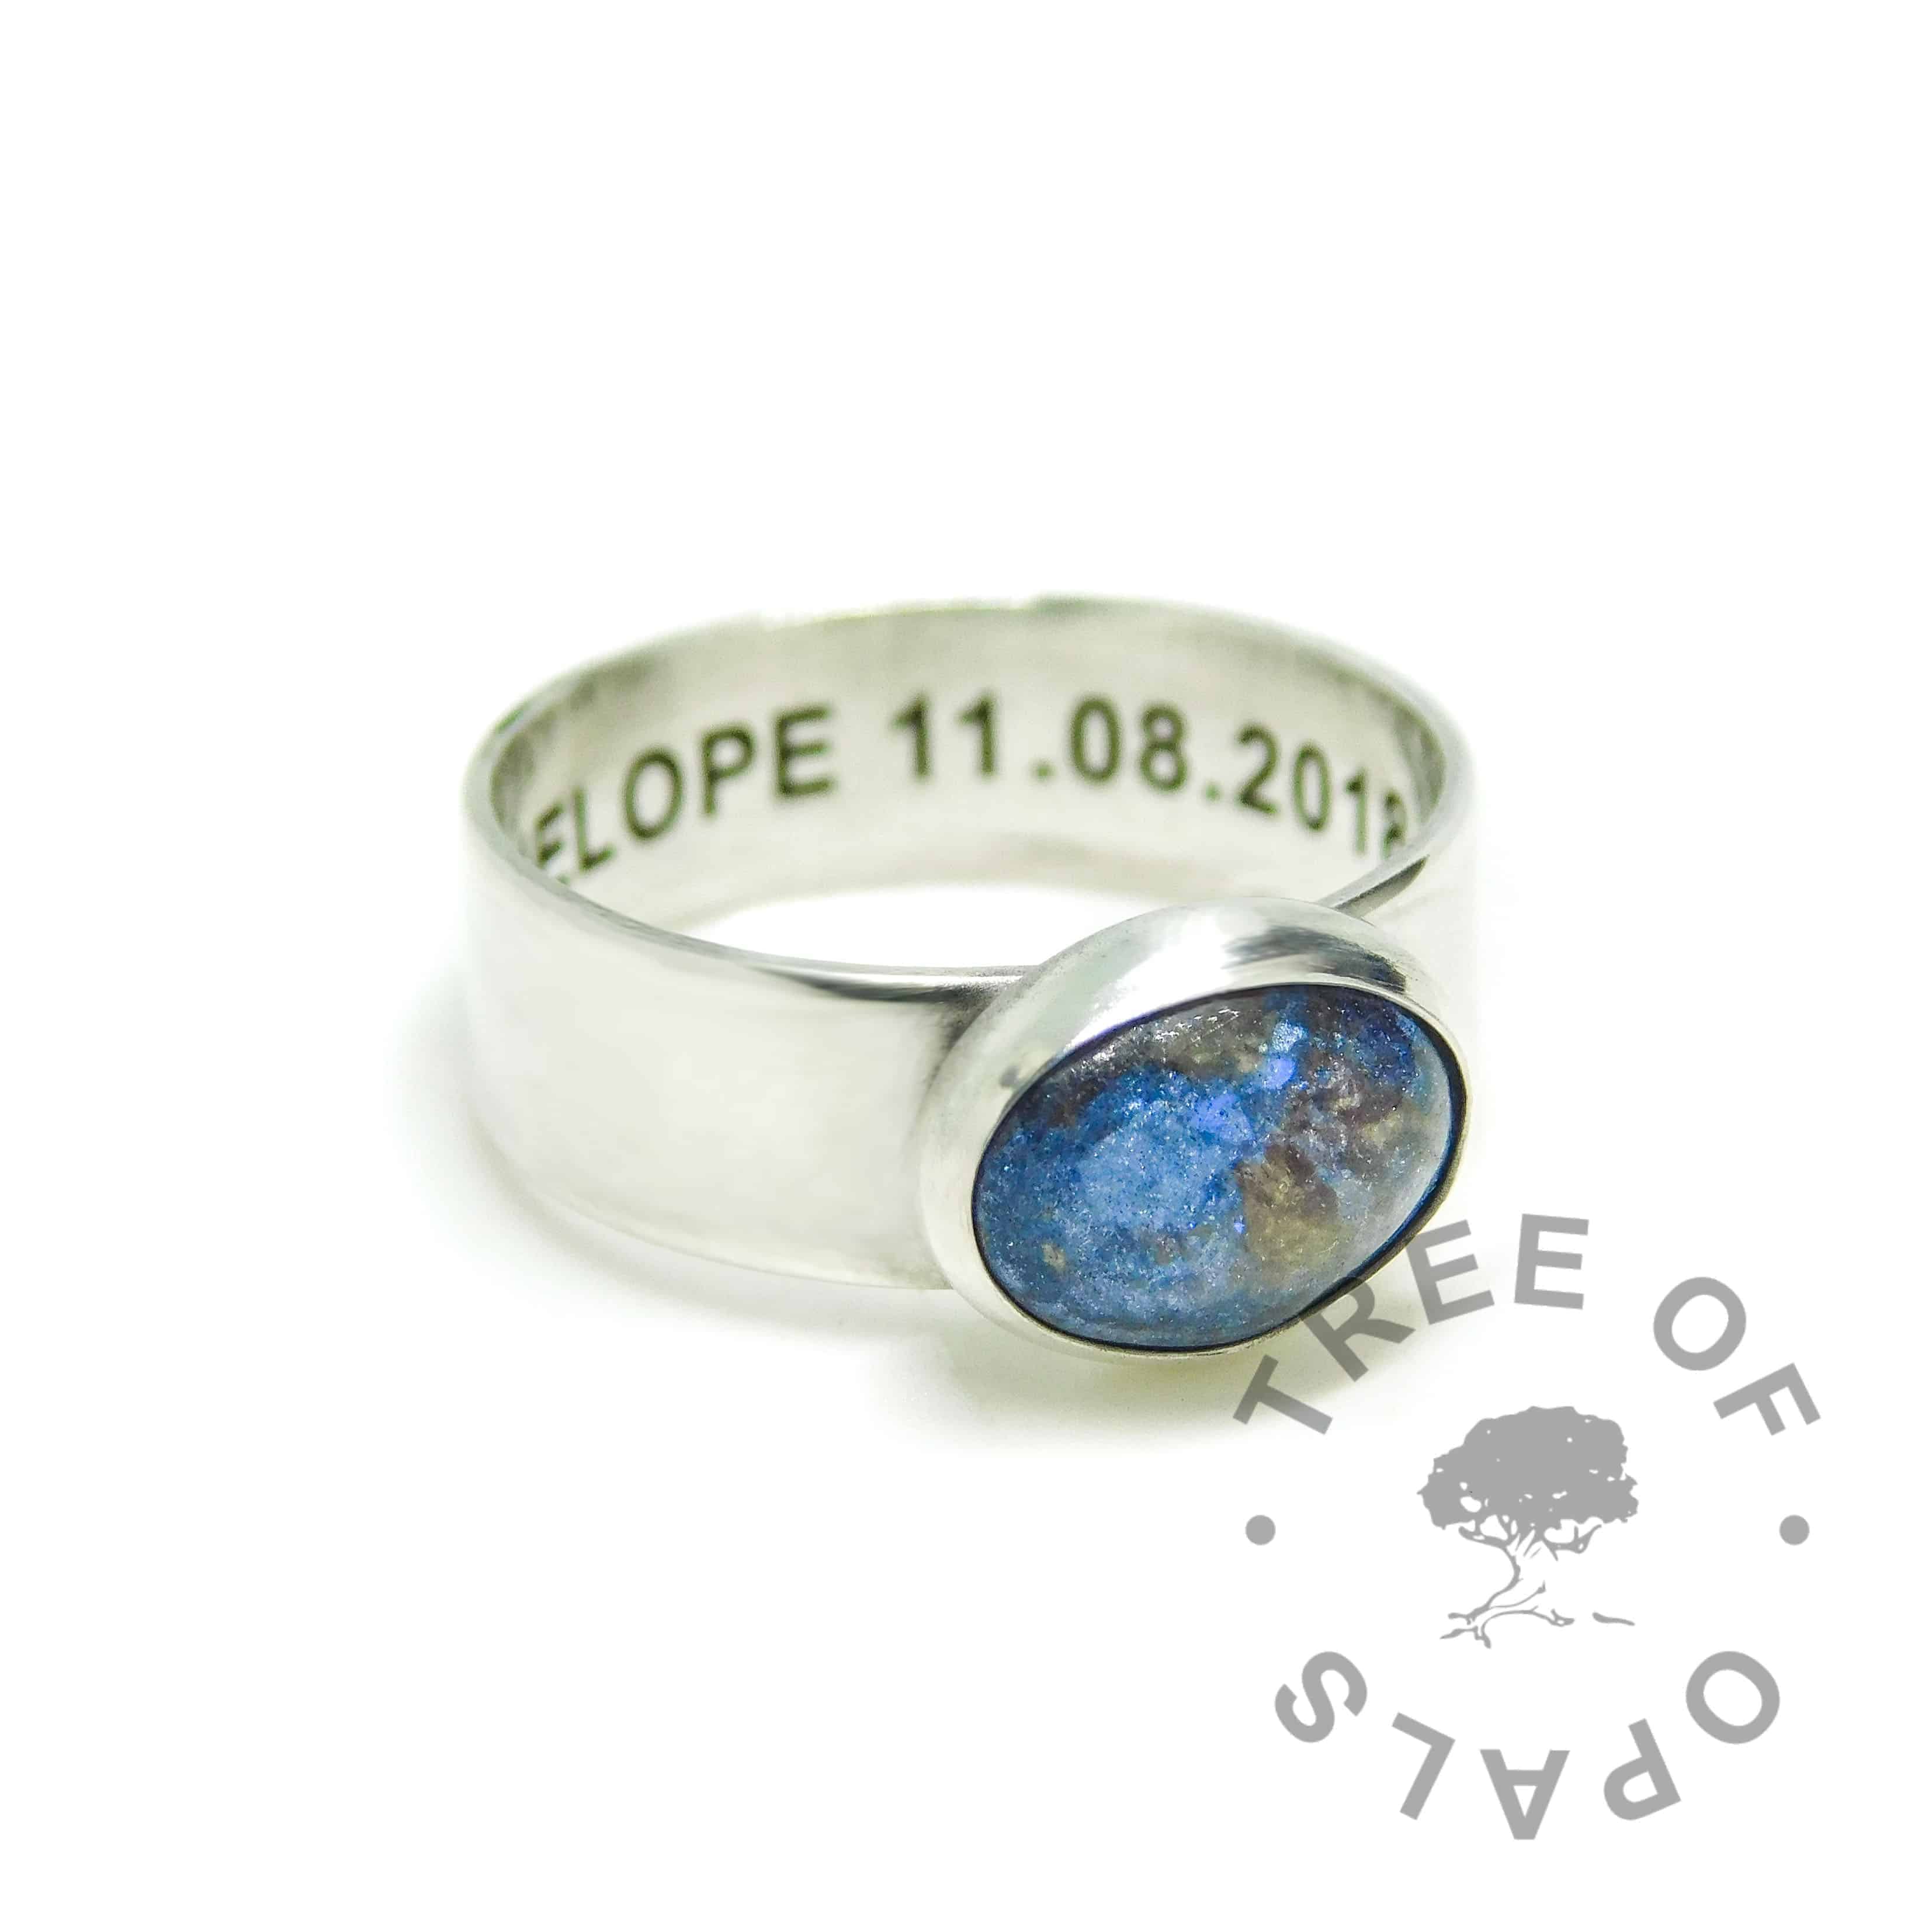 Aegean blue umbilical cord ring on 6mm shiny band. Solid 925 sterling EcoSilver handmade ring with engraved text on the inside of the band, in Arial font. 10x8mm bezel cup rubbed over the cabochon for security.